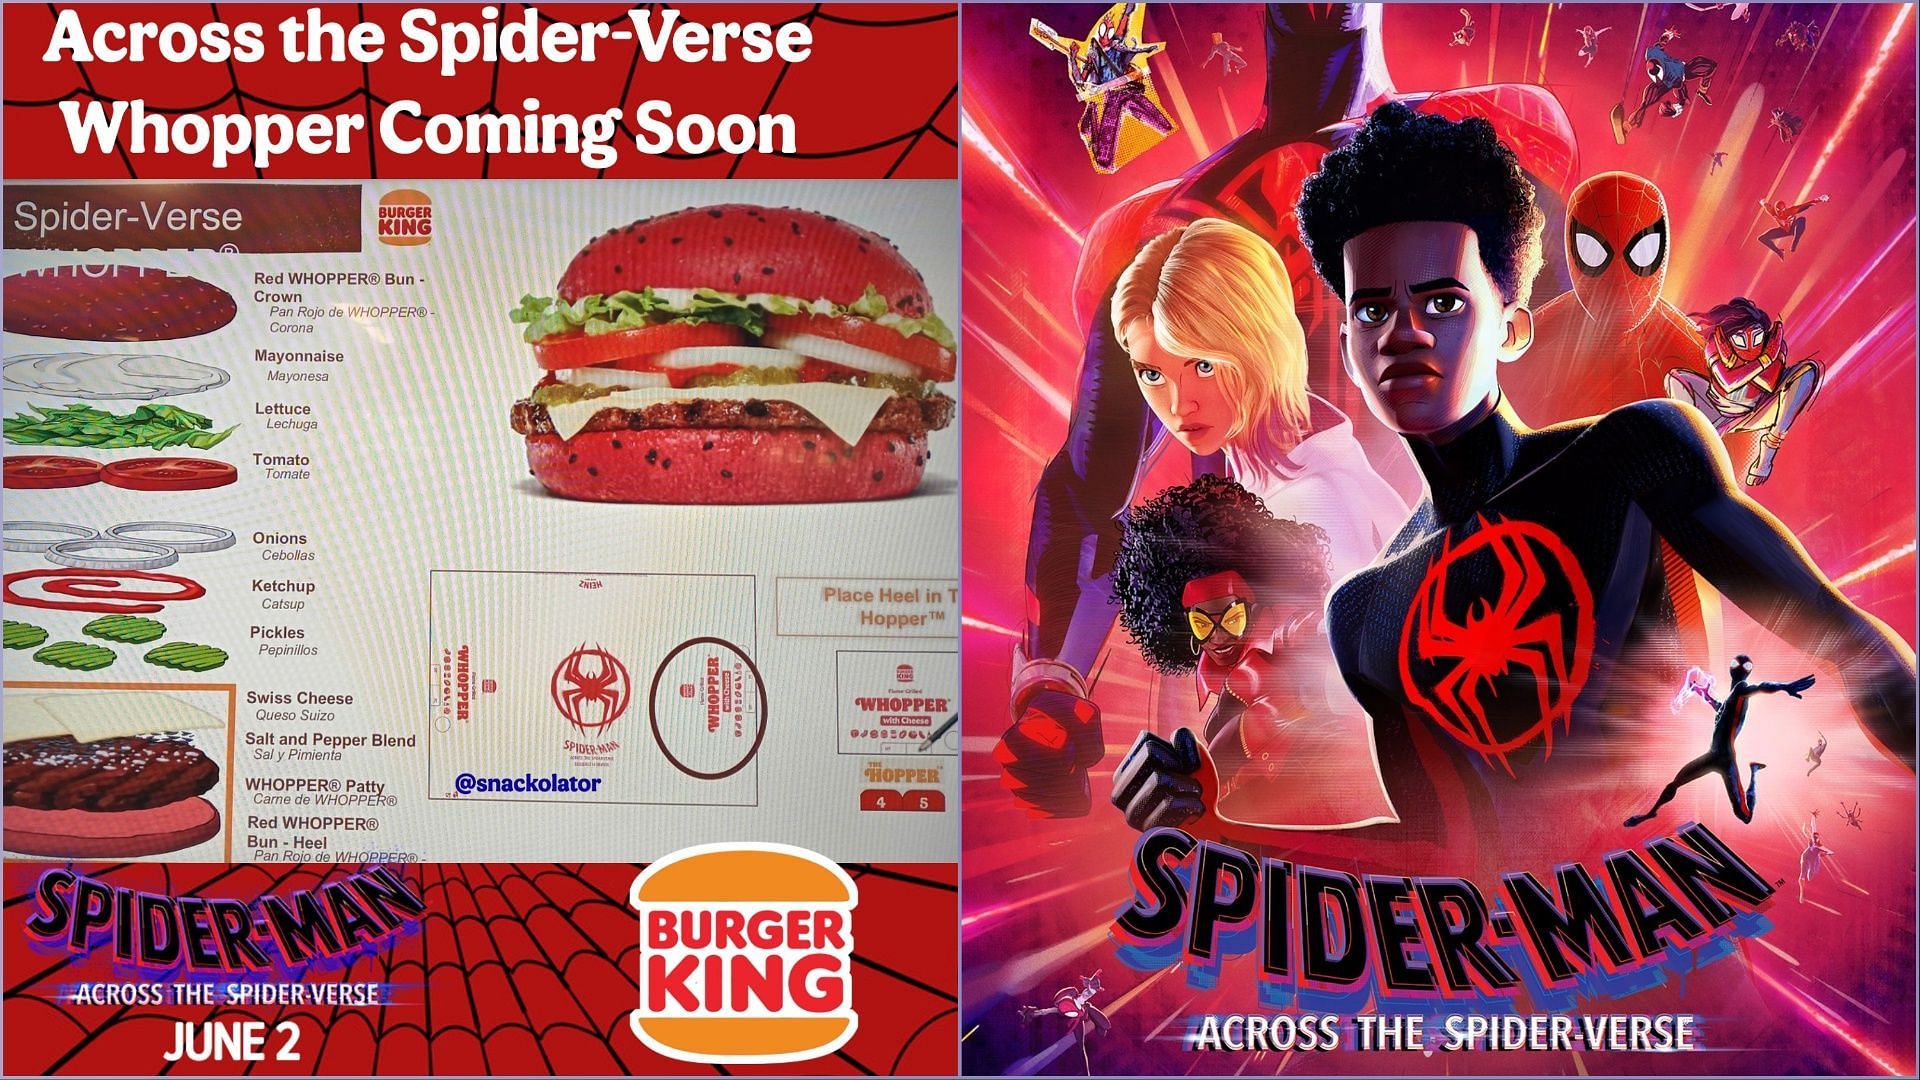 Burger King unveils new Spider-Verse Whopper to celebrate the upcoming release of Spider-Verse movie (Image via Sony Pictures/@ snackolator on Twitter)